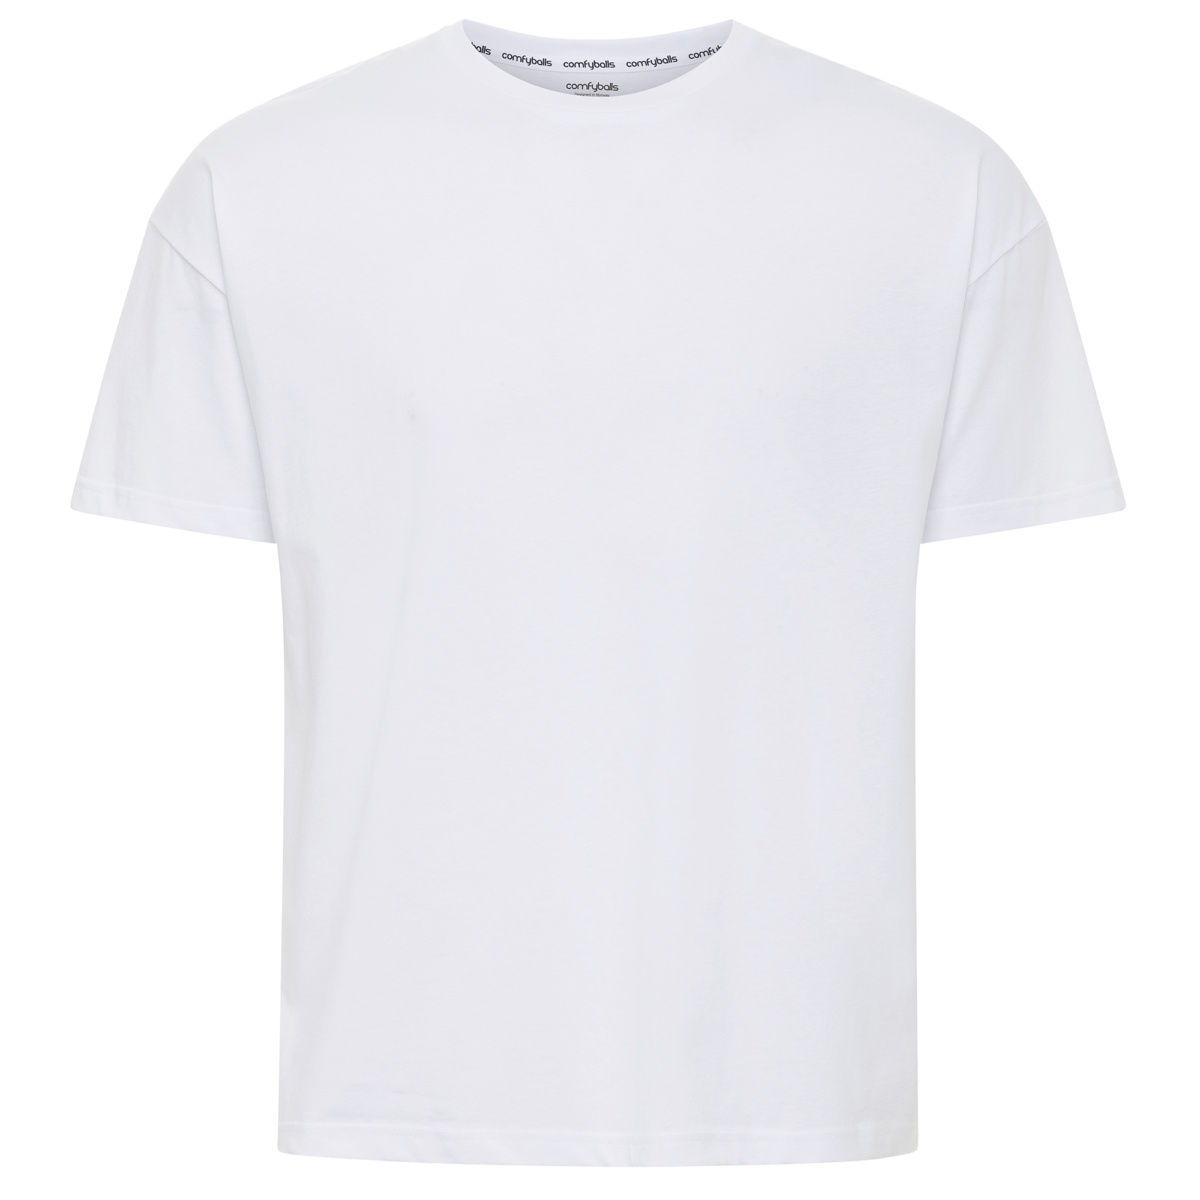 Comfy Oversize White Tee